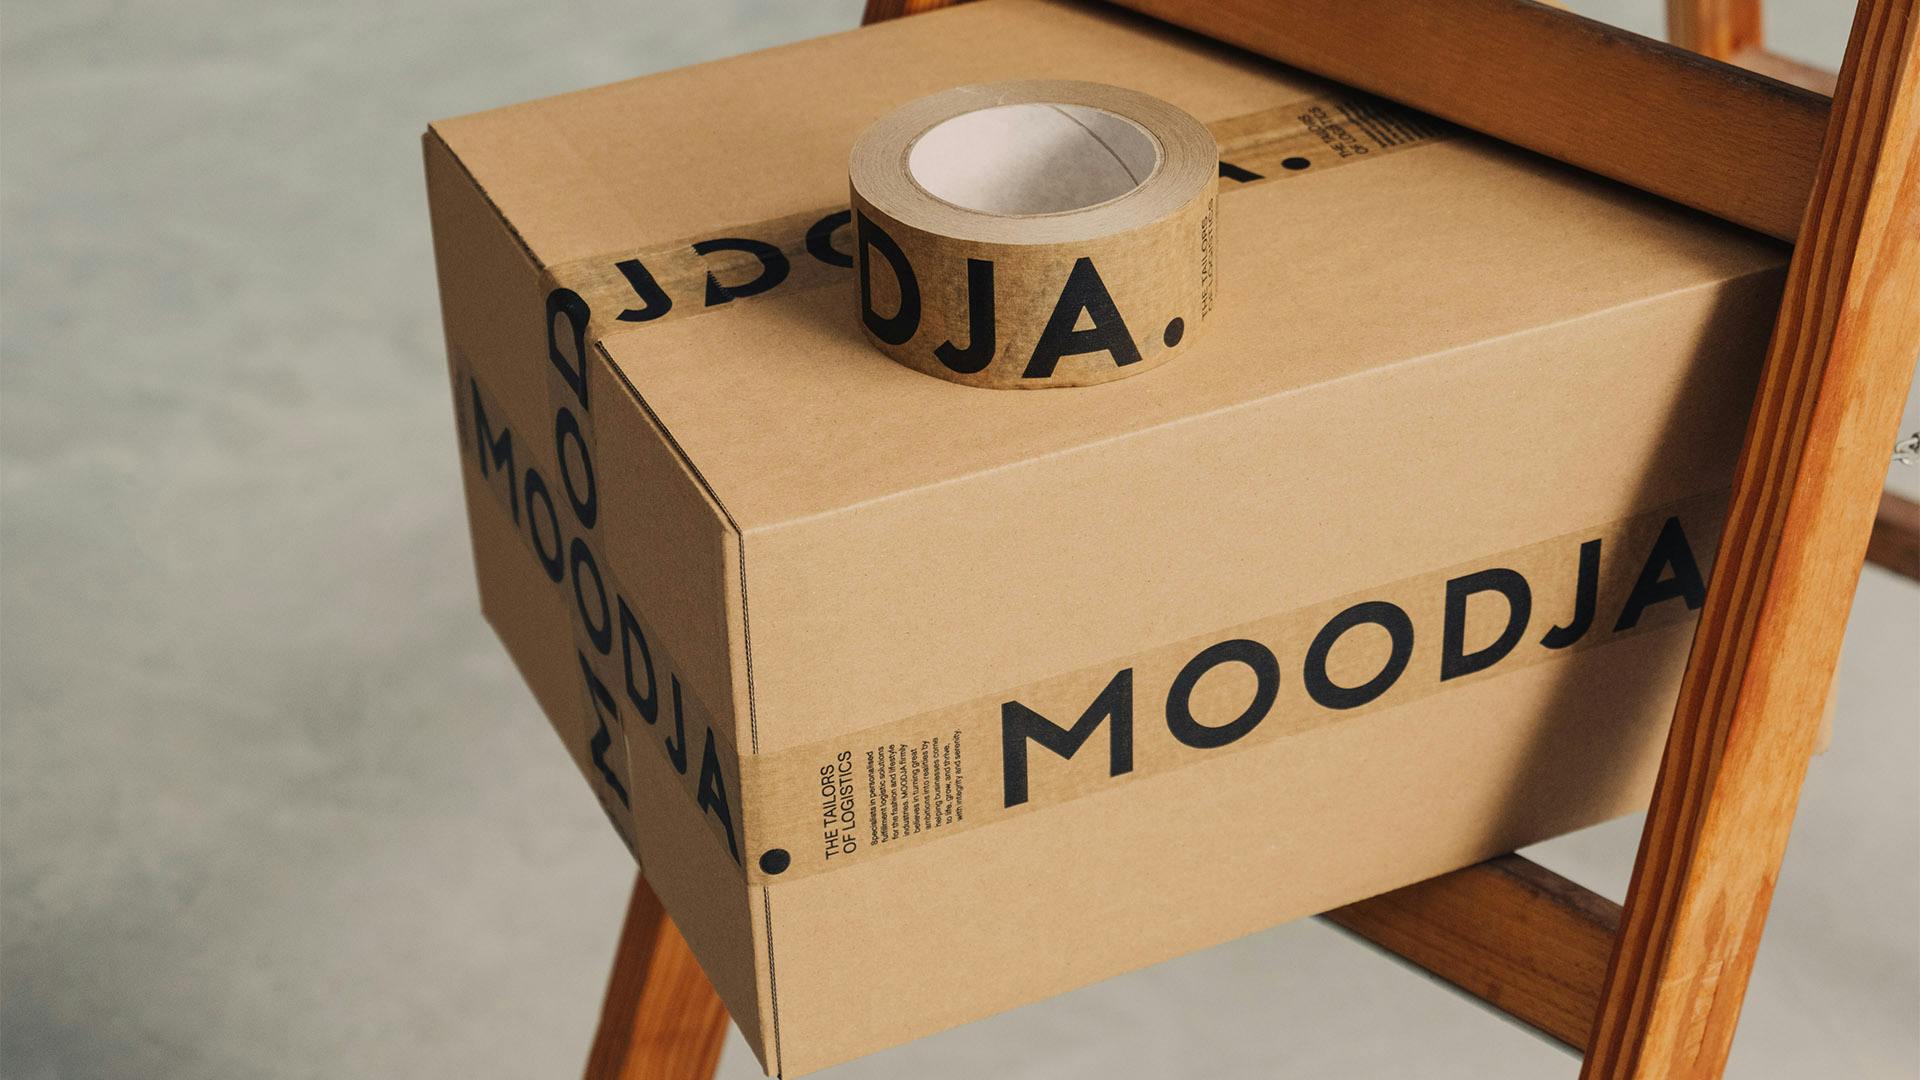 MOODJA fulfillment services personalized packaging